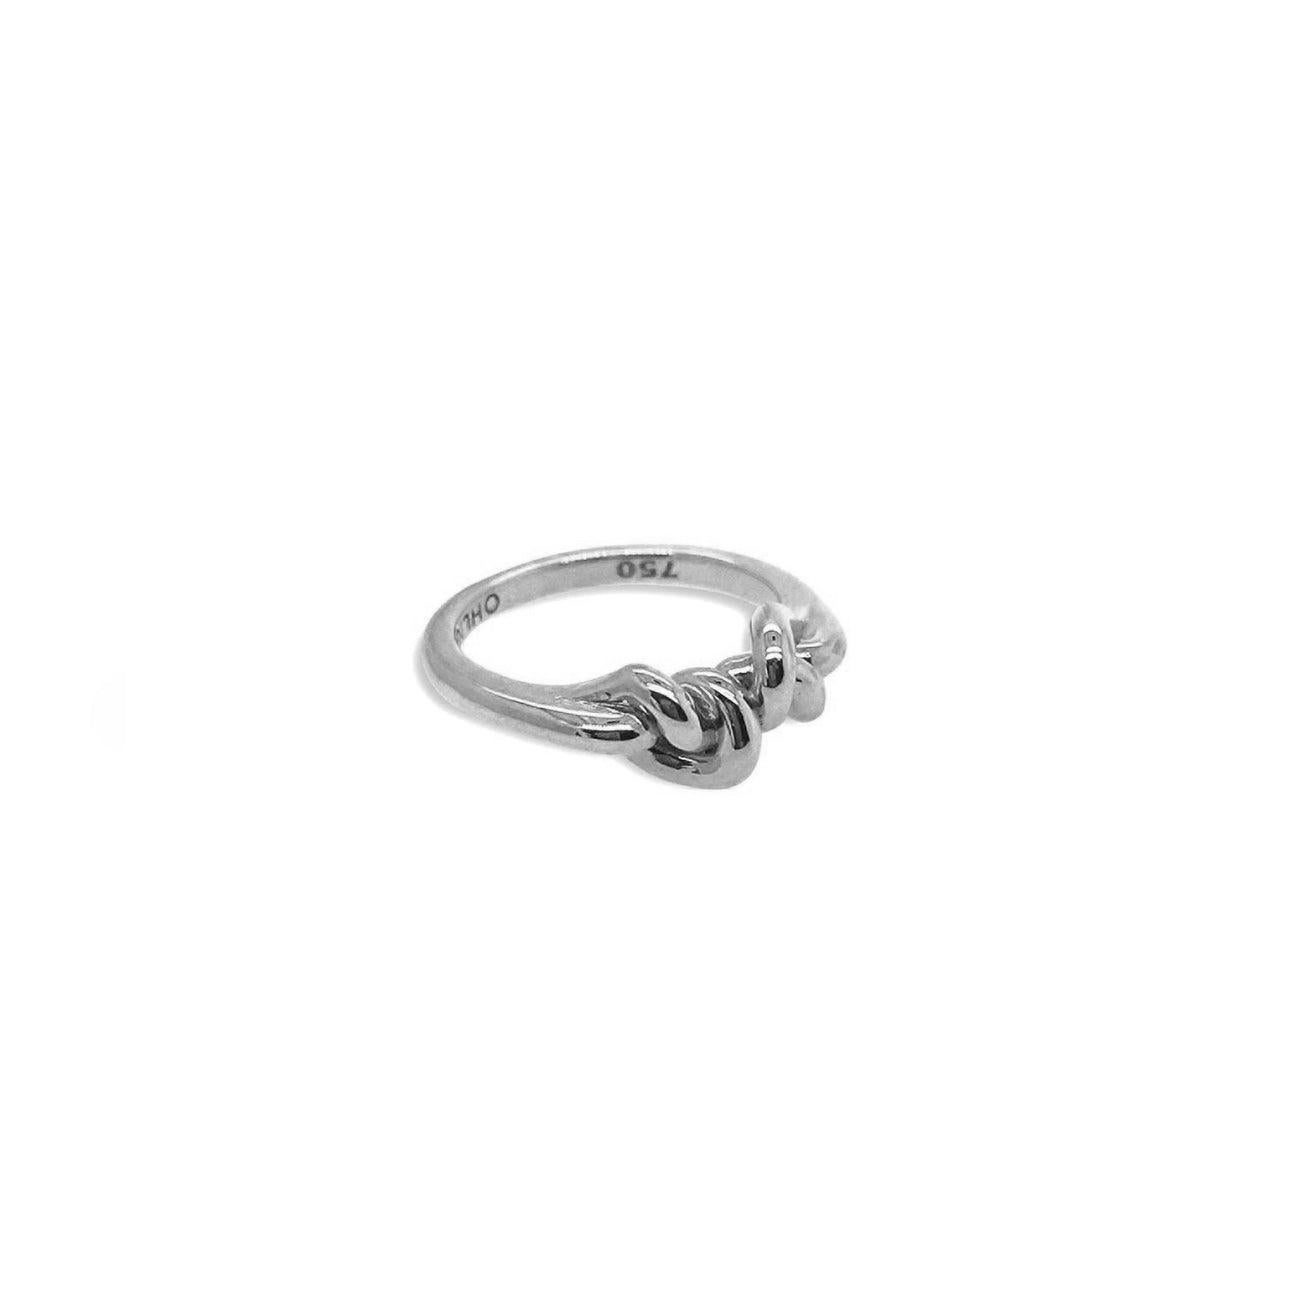 Forget me knot ring  18ct white gold

Double KNOT

size K (AUD/UK)  in yellow gold available or made to order*